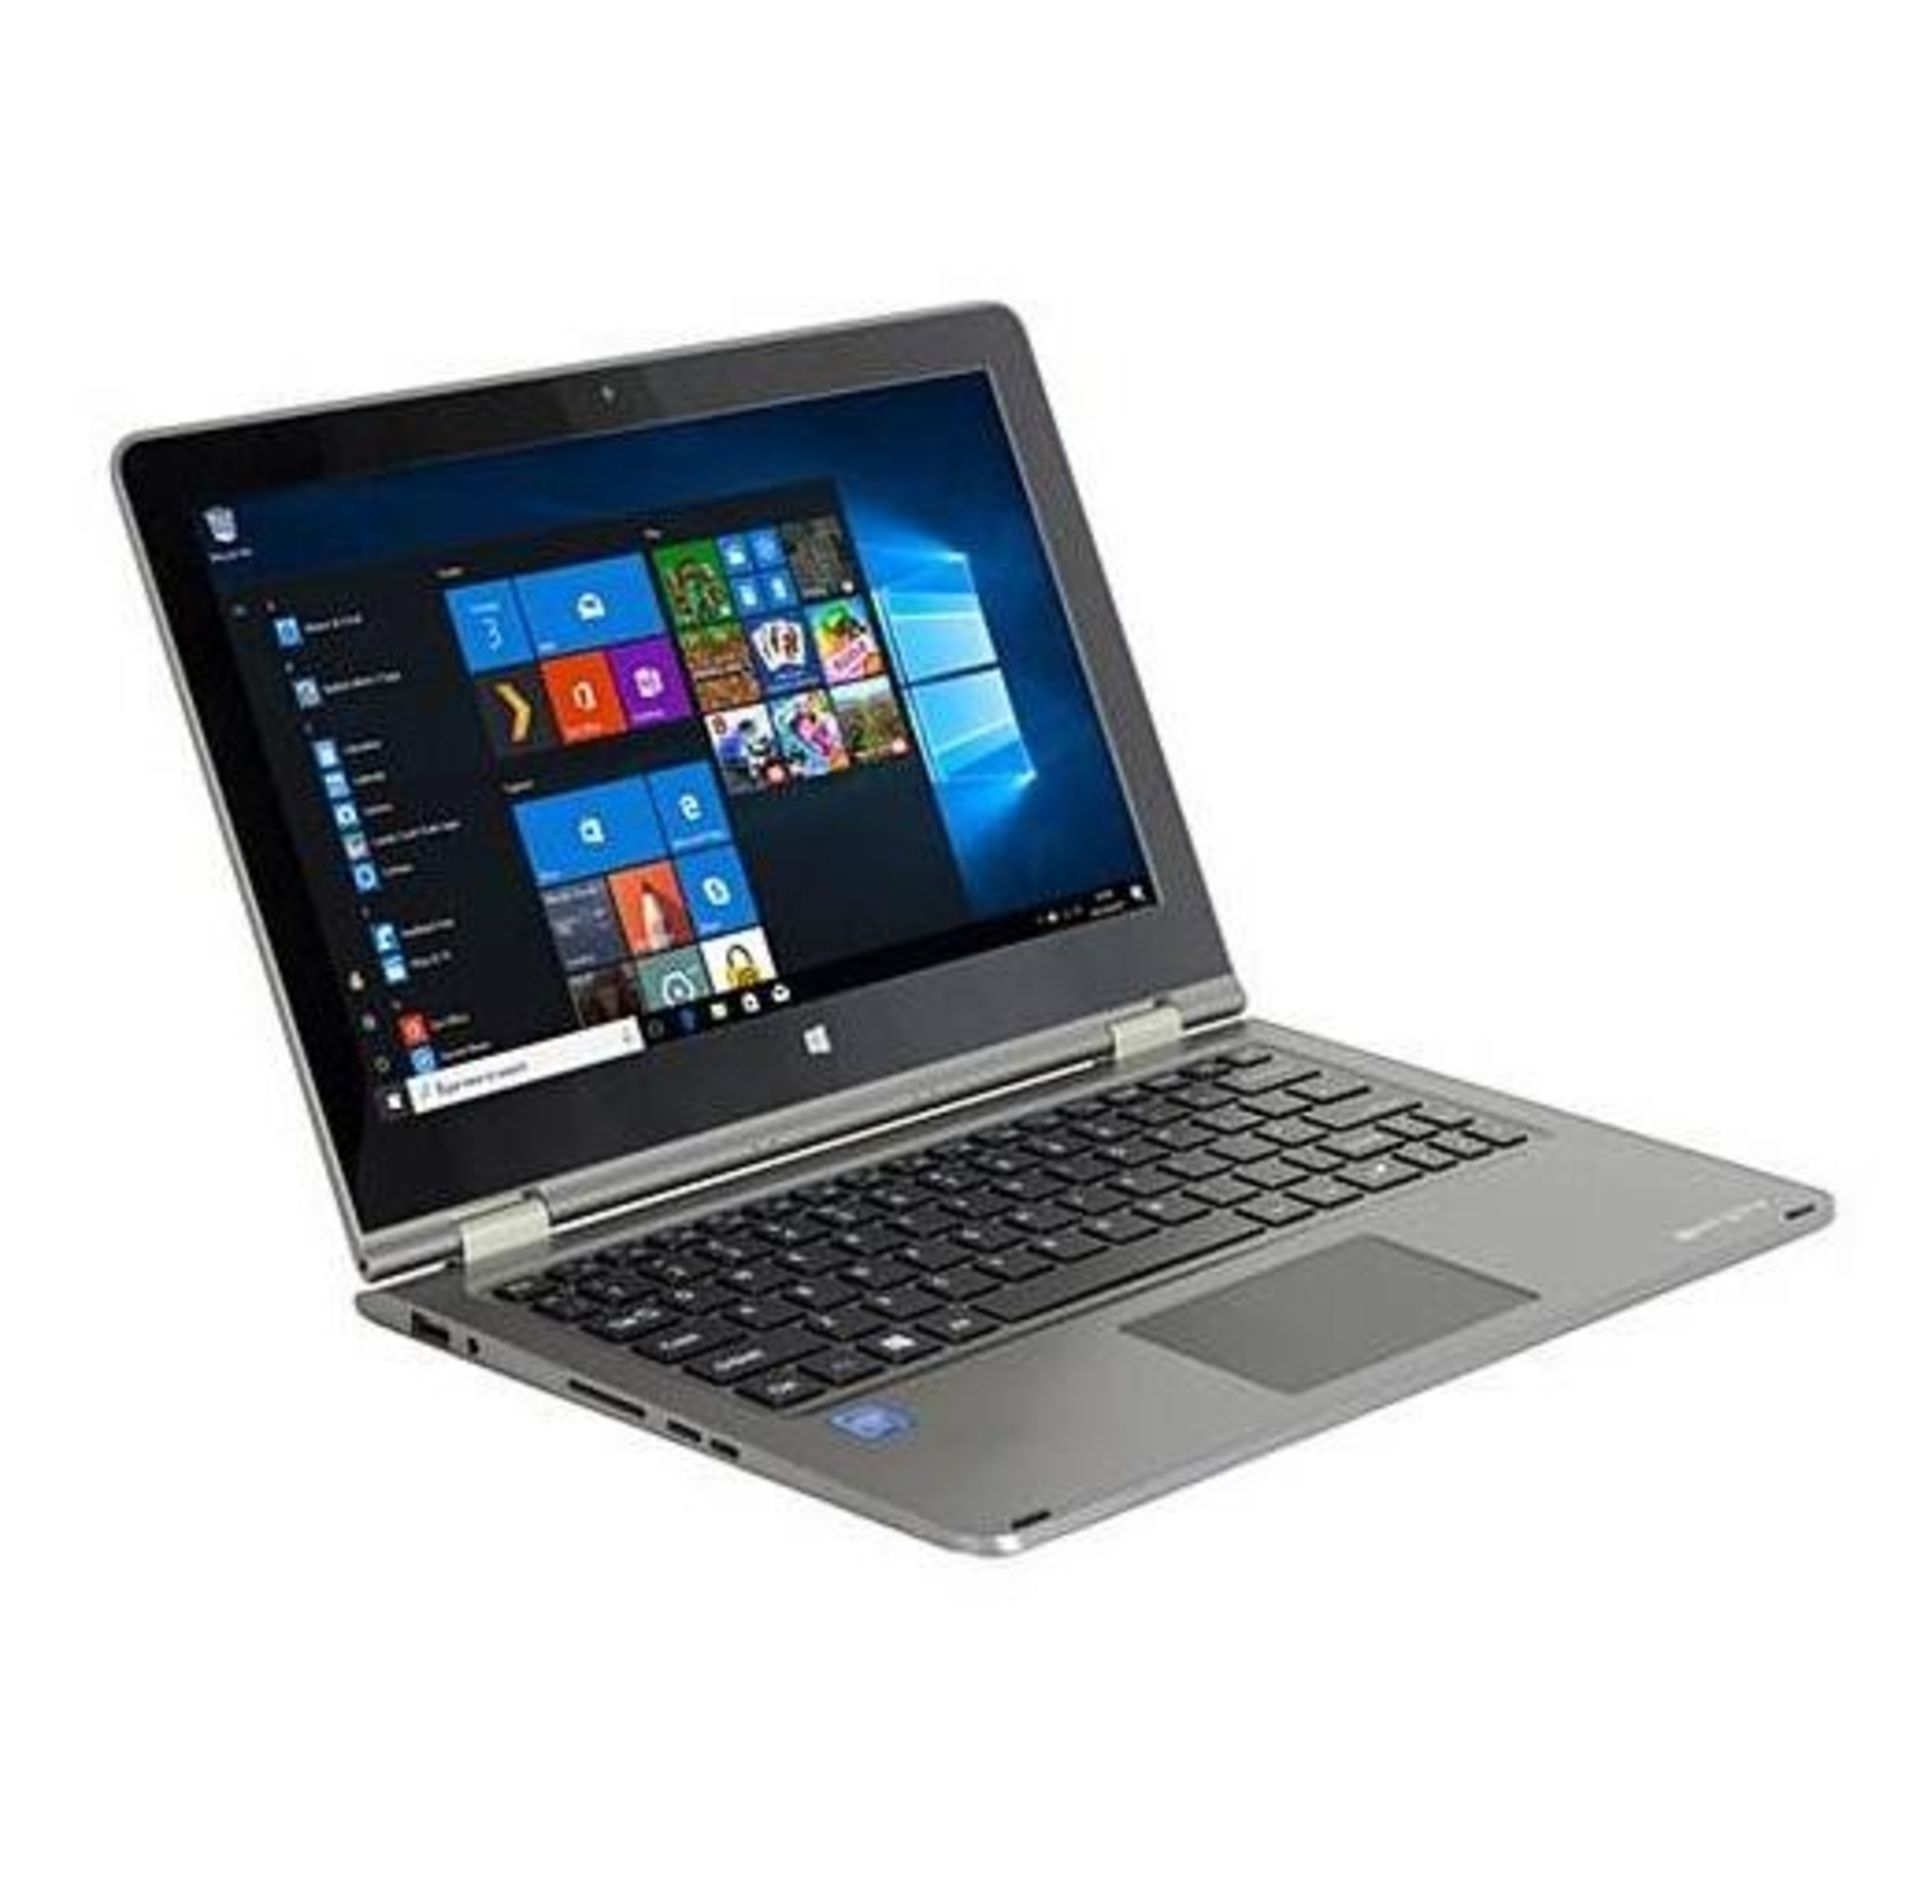 (M16)Entity YU629 11.6 Inch 2-in-1 Convetible Laptop Tablet 32GB eMMC 2GB RAM Win10 Windows 10 ... - Image 2 of 3